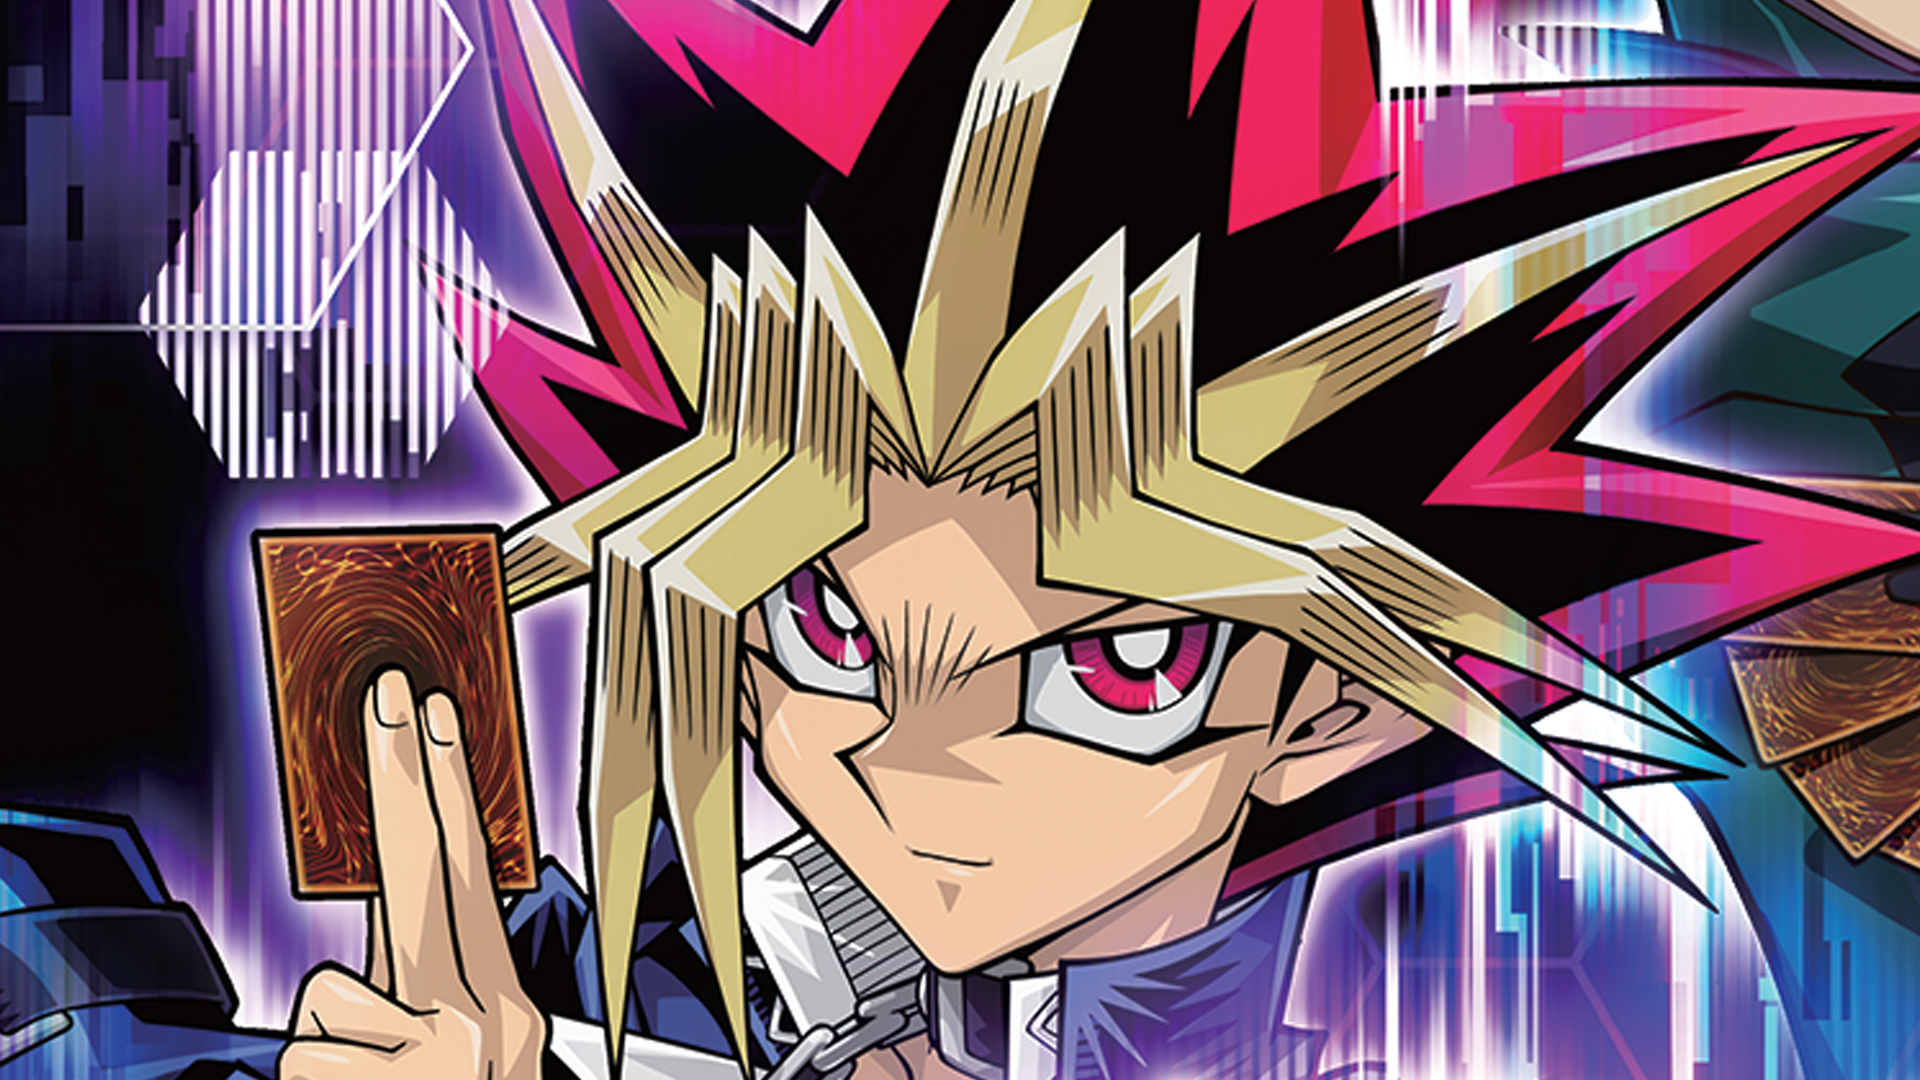 Image for Yu-Gi-Oh! Banlist for May 2022: Forbidden, Limited and Semi-Limited